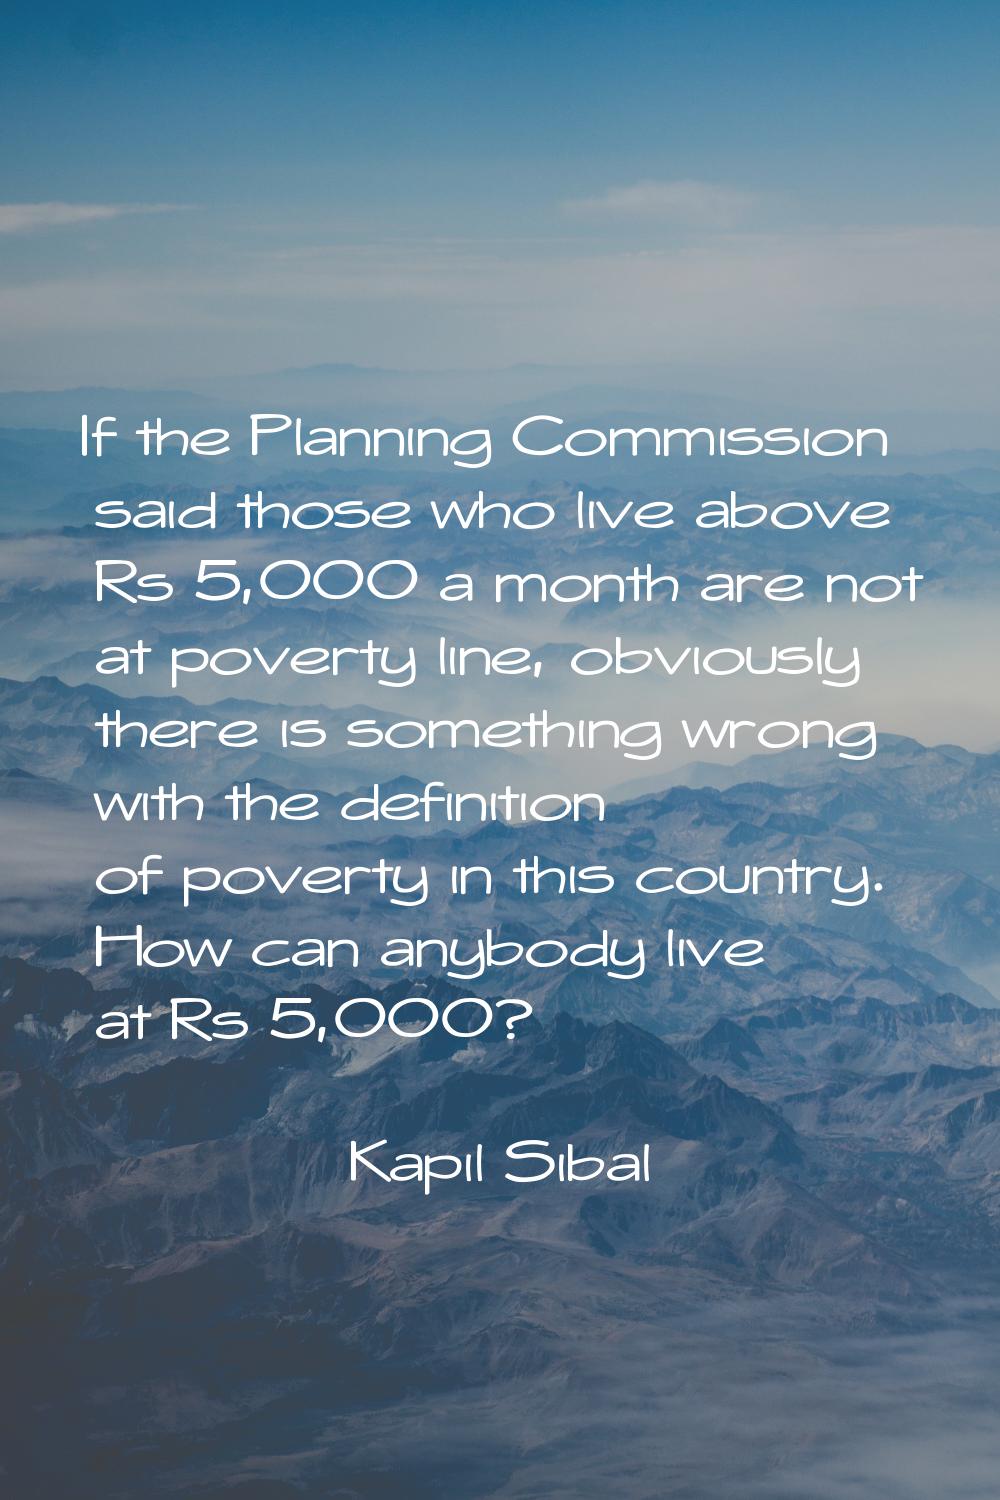 If the Planning Commission said those who live above Rs 5,000 a month are not at poverty line, obvi